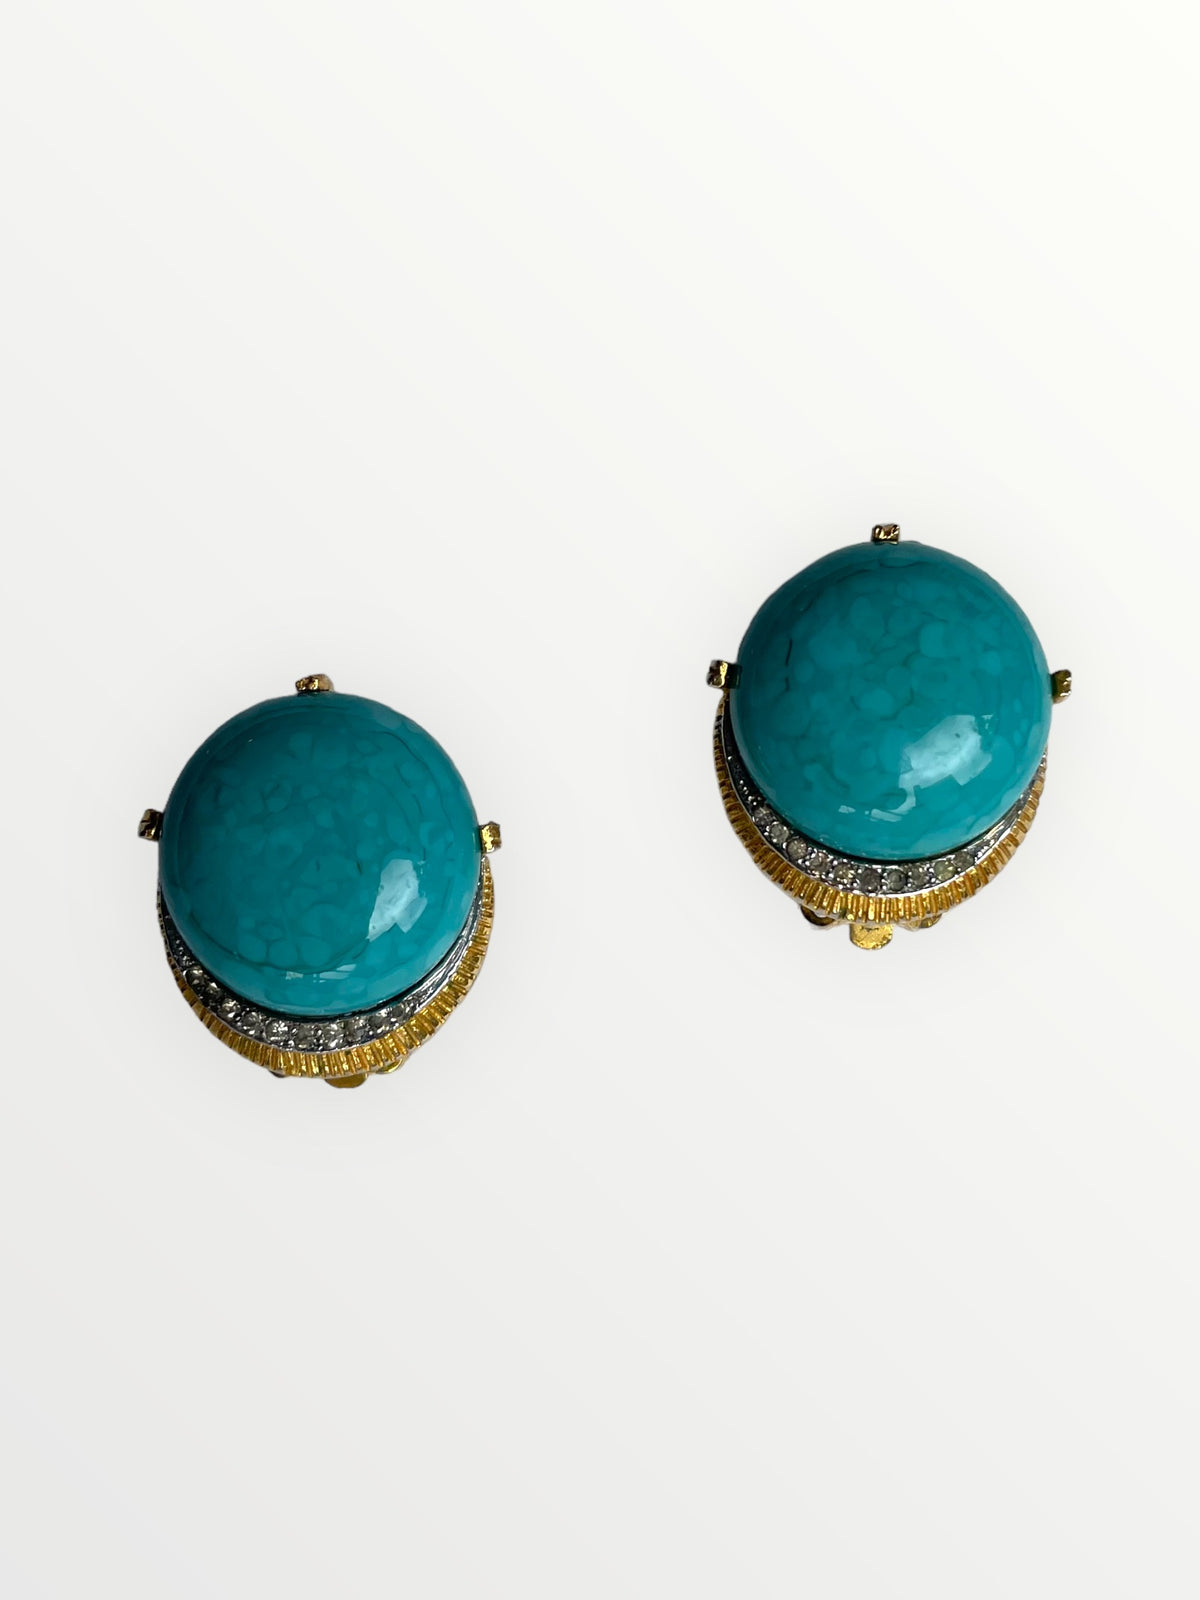 Nettie Rosenstein Gold Plated Turquoise Glass and Rhinestone Clip Earrings